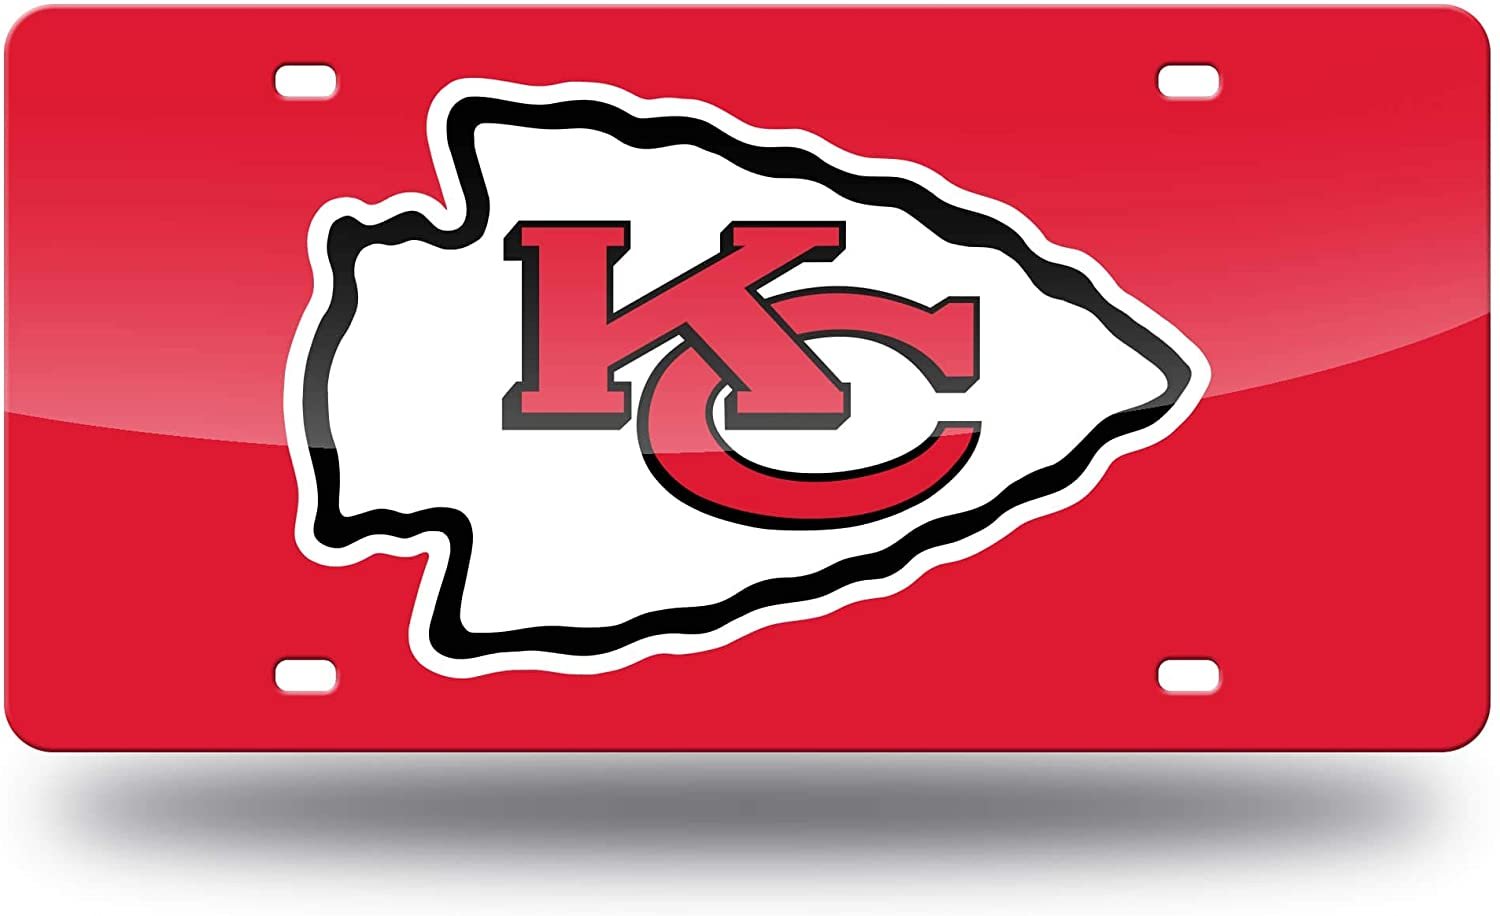 Kansas City Chiefs Premium Laser Cut Tag License Plate, Red, Mirrored Acrylic Inlaid, 12x6 Inch